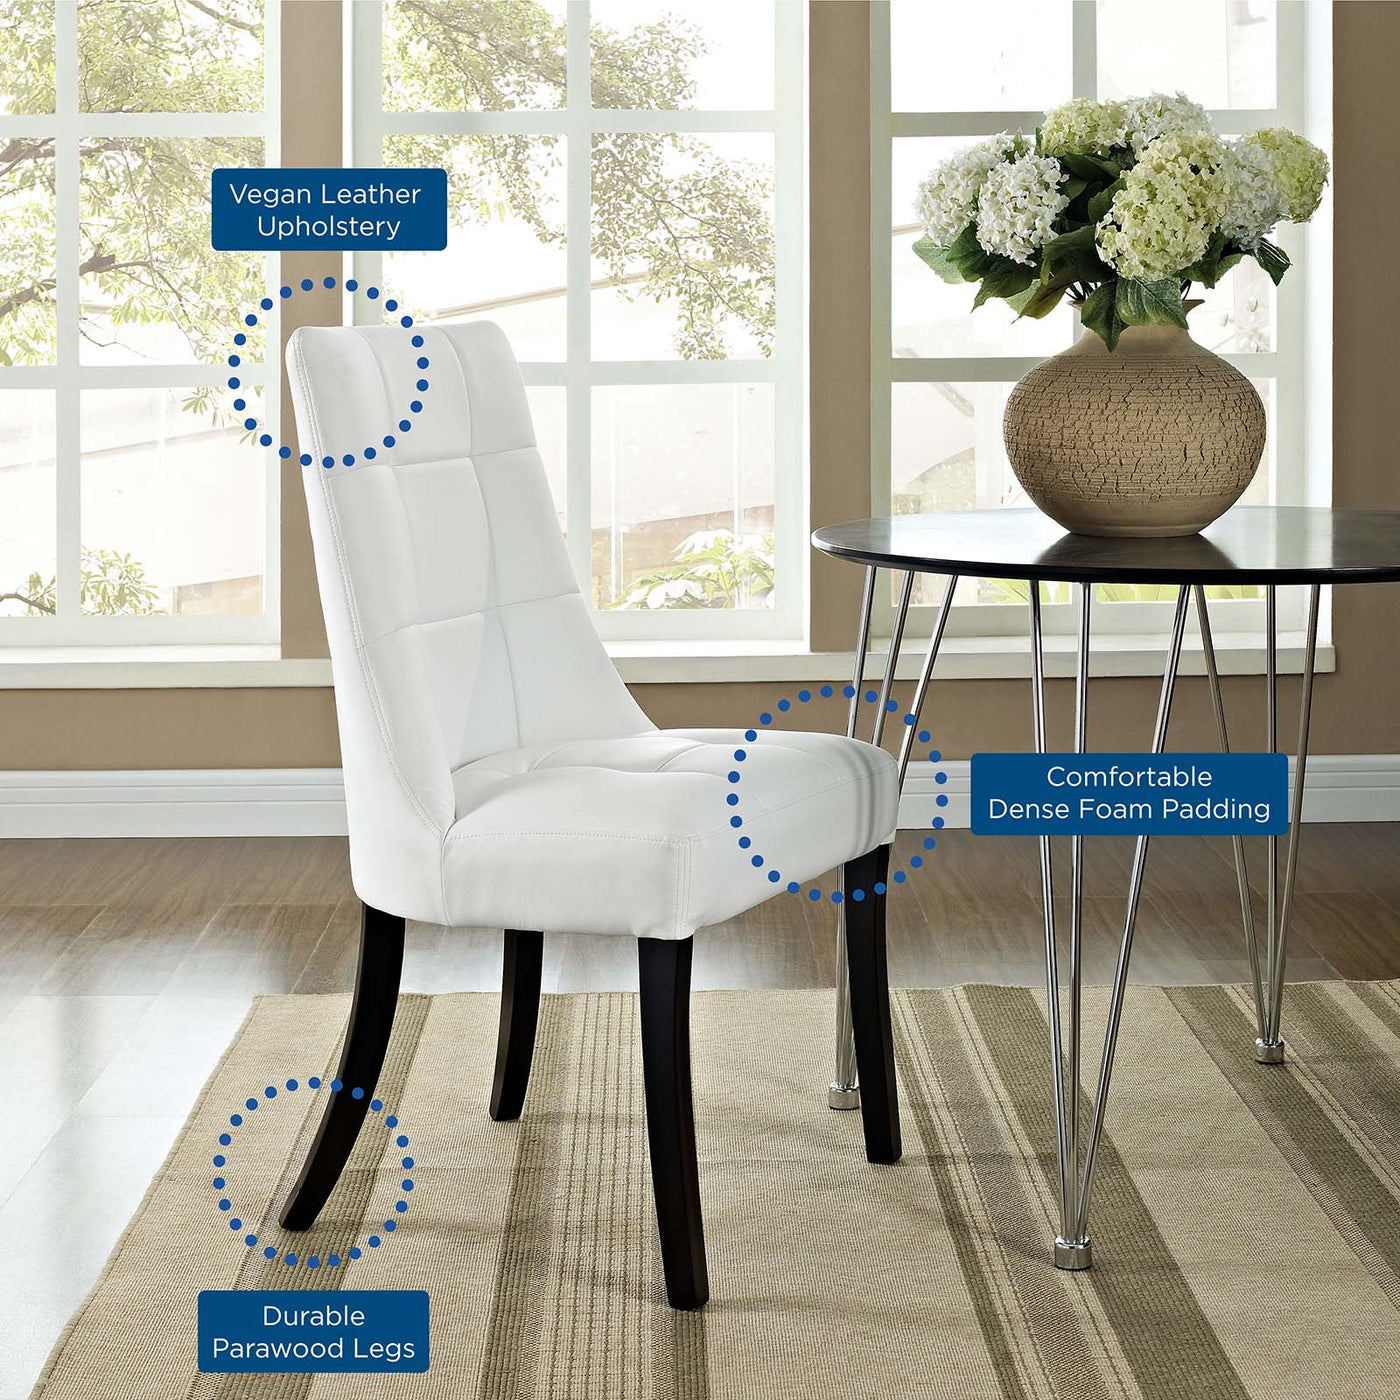 Noblesse Dining Chair Vinyl Set of 2